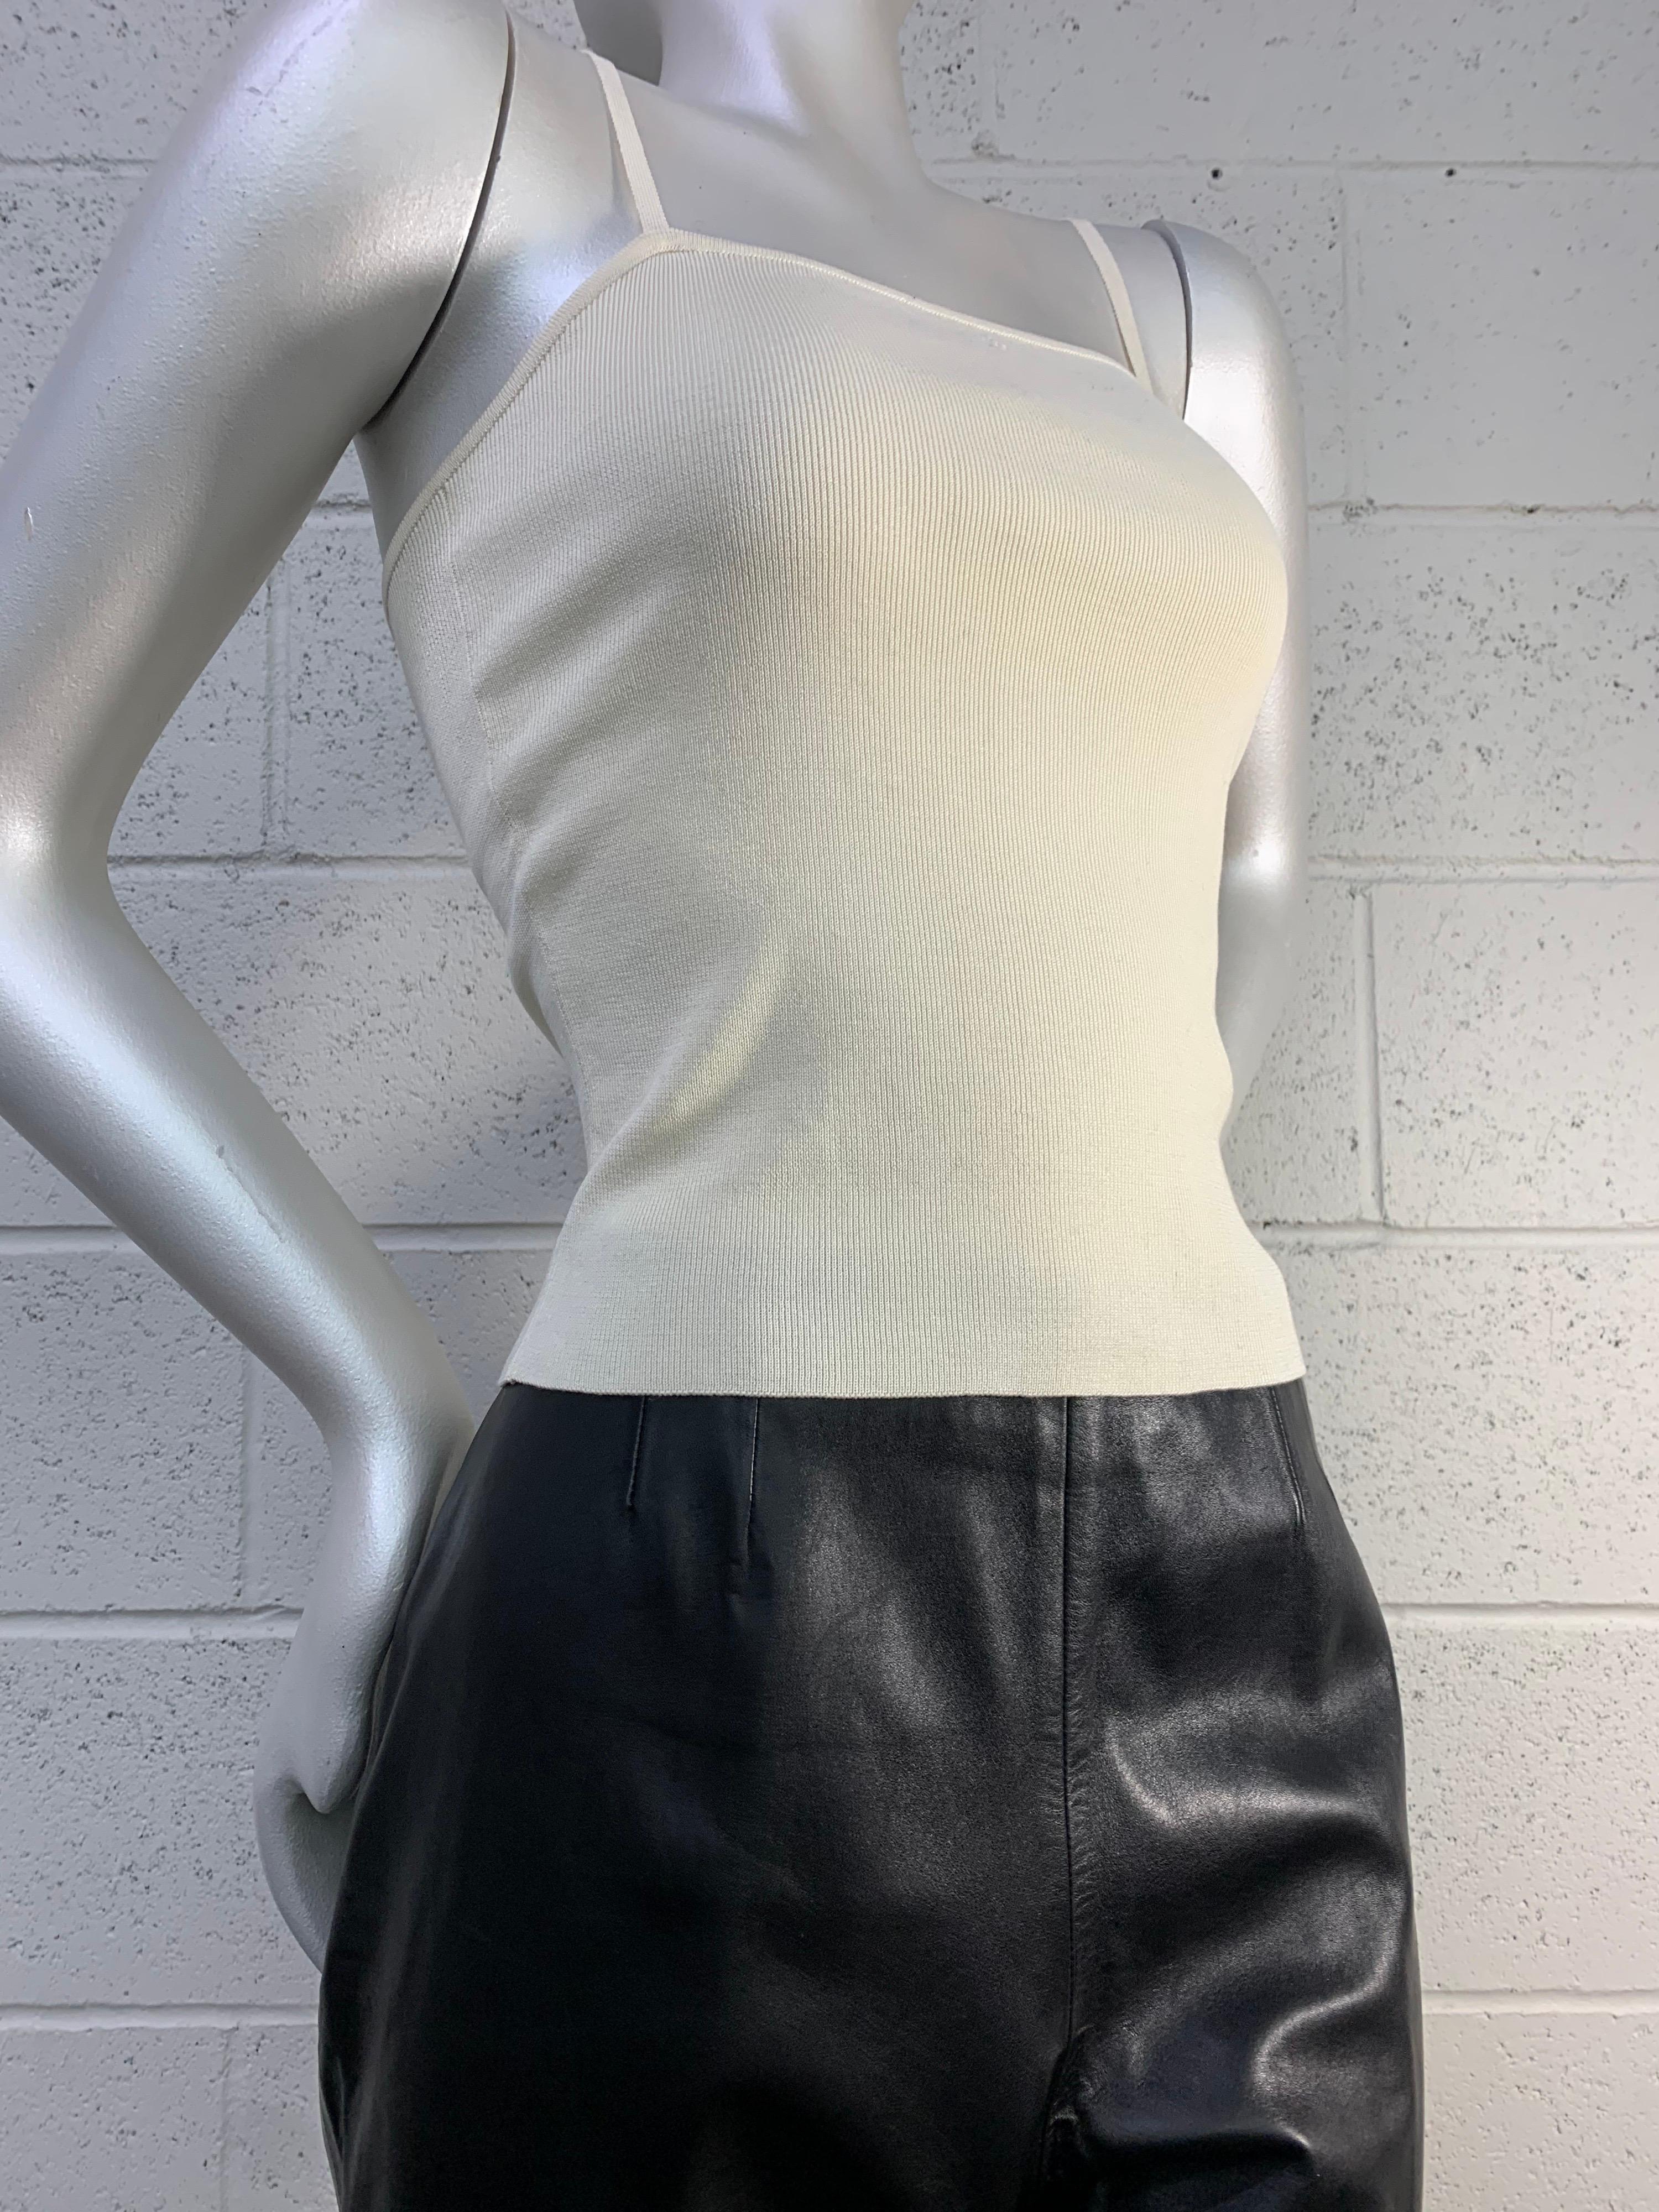 2000 Chanel Autumn black lambskin flat-front wide-leg pant with no waistband or belt loops. Side zipper. Size EU44. 

2000 Chanel Cruise cream rib-knit camisole with lingerie straps and back zipper make this a classic minimalist look. Size EU42